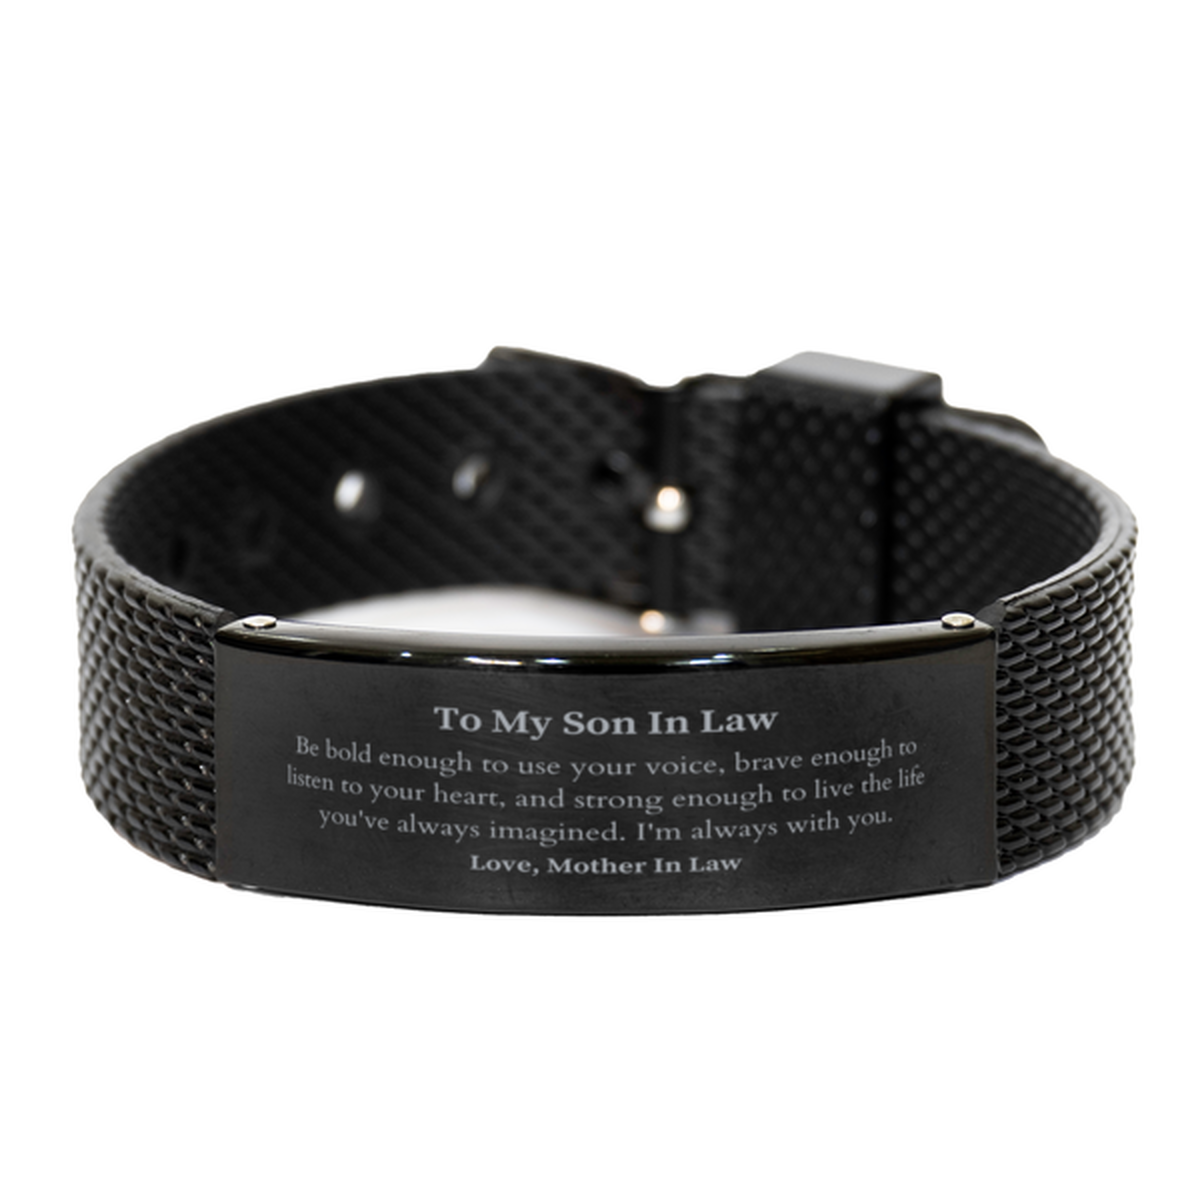 Keepsake Son In Law Black Shark Mesh Bracelet Gift Idea Graduation Christmas Birthday Son In Law from Mother In Law, Son In Law Be bold enough to use your voice, brave enough to listen to your heart. Love, Mother In Law